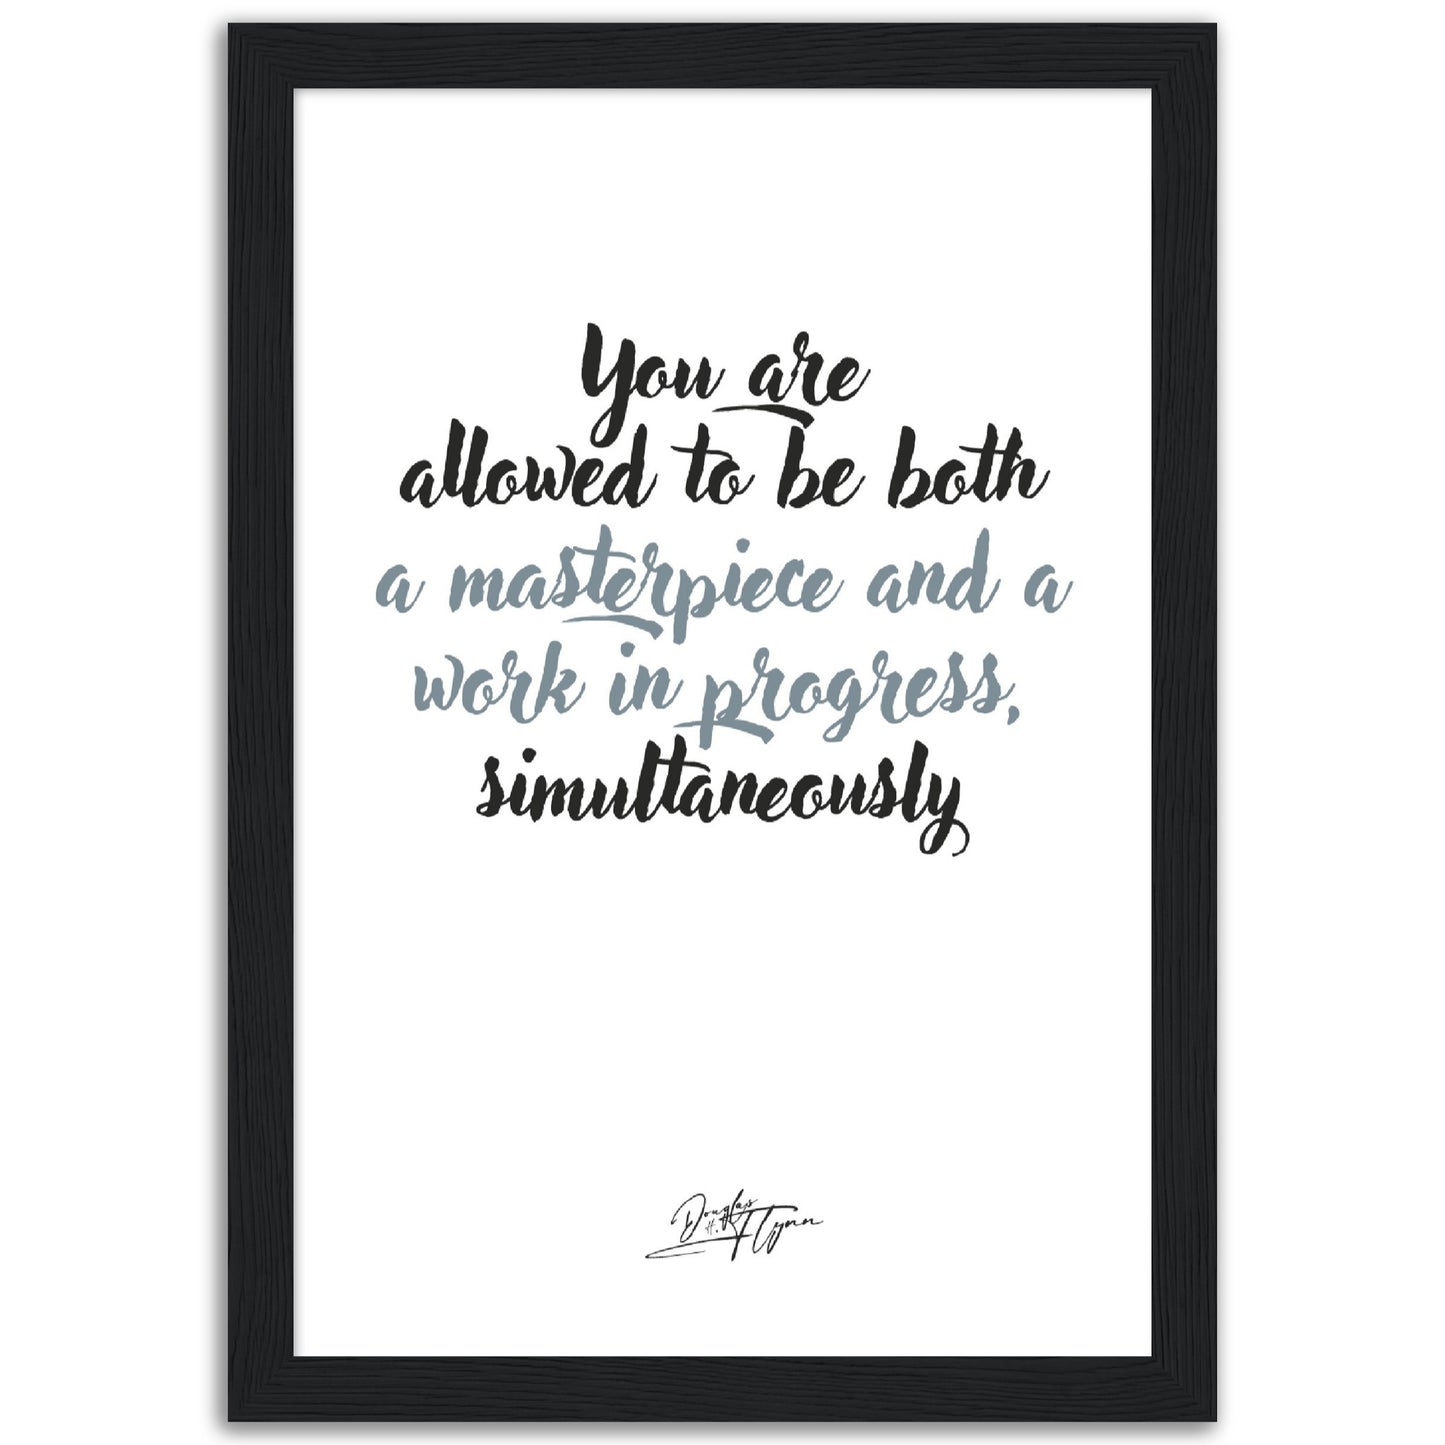 »You are allowed to be both«